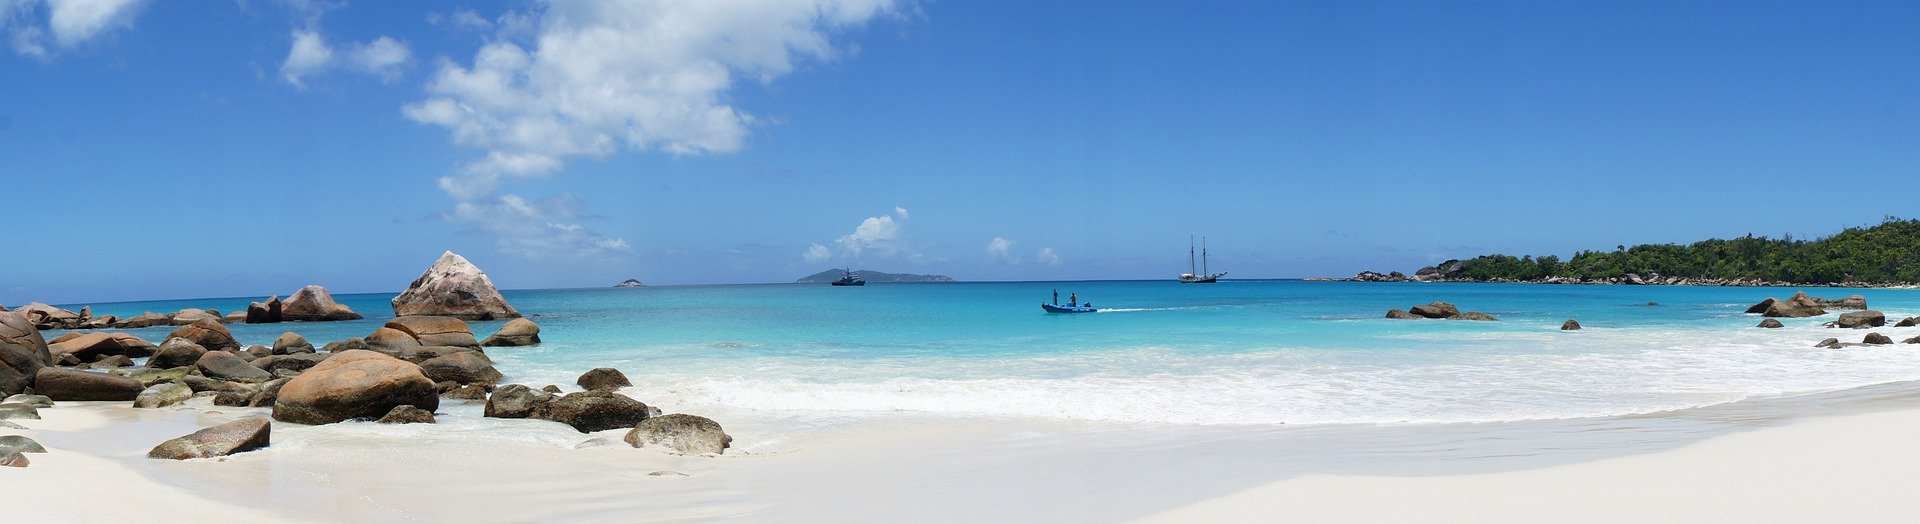 A Caribbean beach with boats in the water 